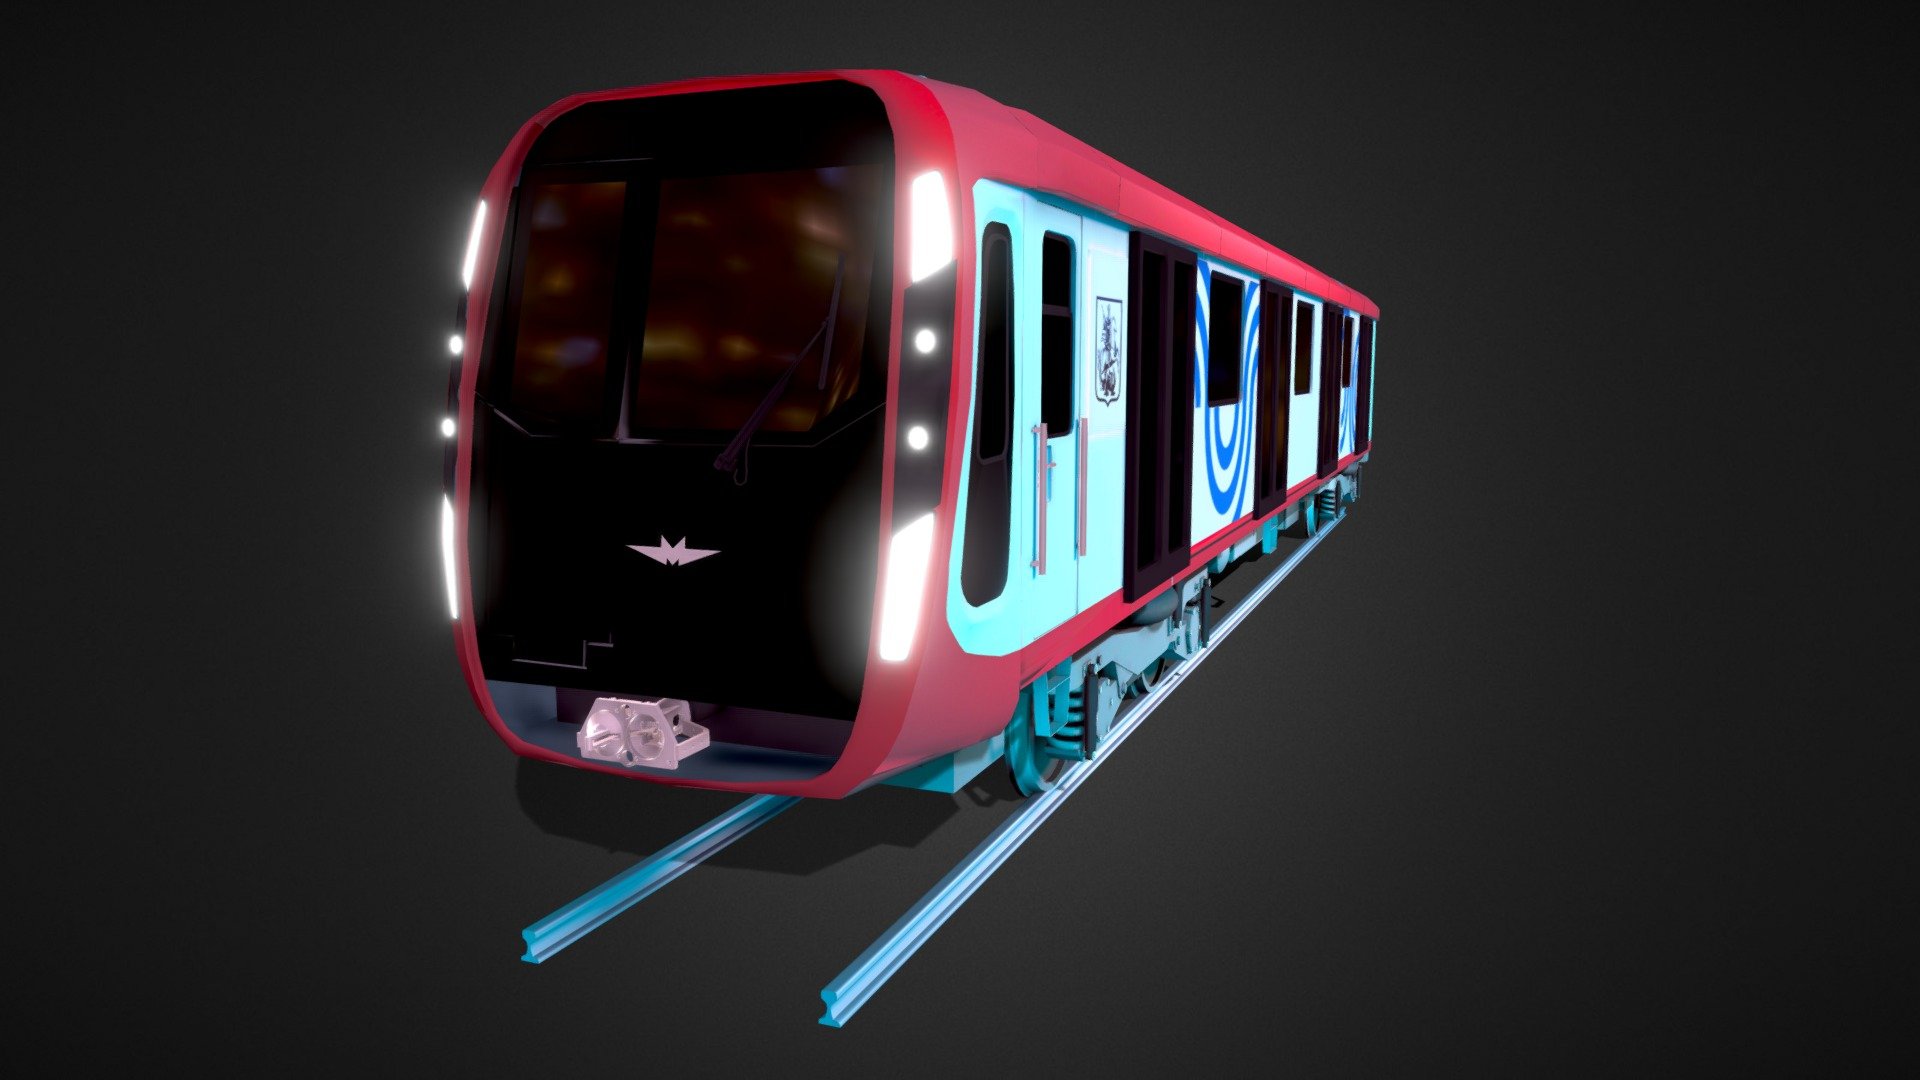 Moskva 2020 will be another step into the future of rail transport. Smooth lines of the front, exclusive solutions in the exterior and interior of the metro train - every element of the new generation Moskva 2020 metro train has been brought to perfection. The rolling stock stands for quality, comfort and innovation.
 The width of the inter-car gangway in the 81-775/776/777 series metro cars has been increased by 57% and will be 1.6 meters; the doorways have been expanded from 1.4 to 1.6 meters. The area of ​​visible glazing of doors inside the car became a record for the Moscow metro - 82% (previously - 47%). Console LCD monitors are located under the ceiling. The compartments are equipped with new over-door displays 1400 mm wide, previously their width did not exceed 1200 mm. Interactive screens on the walls are enlarged. The driver's cab and the passenger compartments are equipped with modern air disinfection systems that decontaminate 99% of viruses and bacteria 3d model